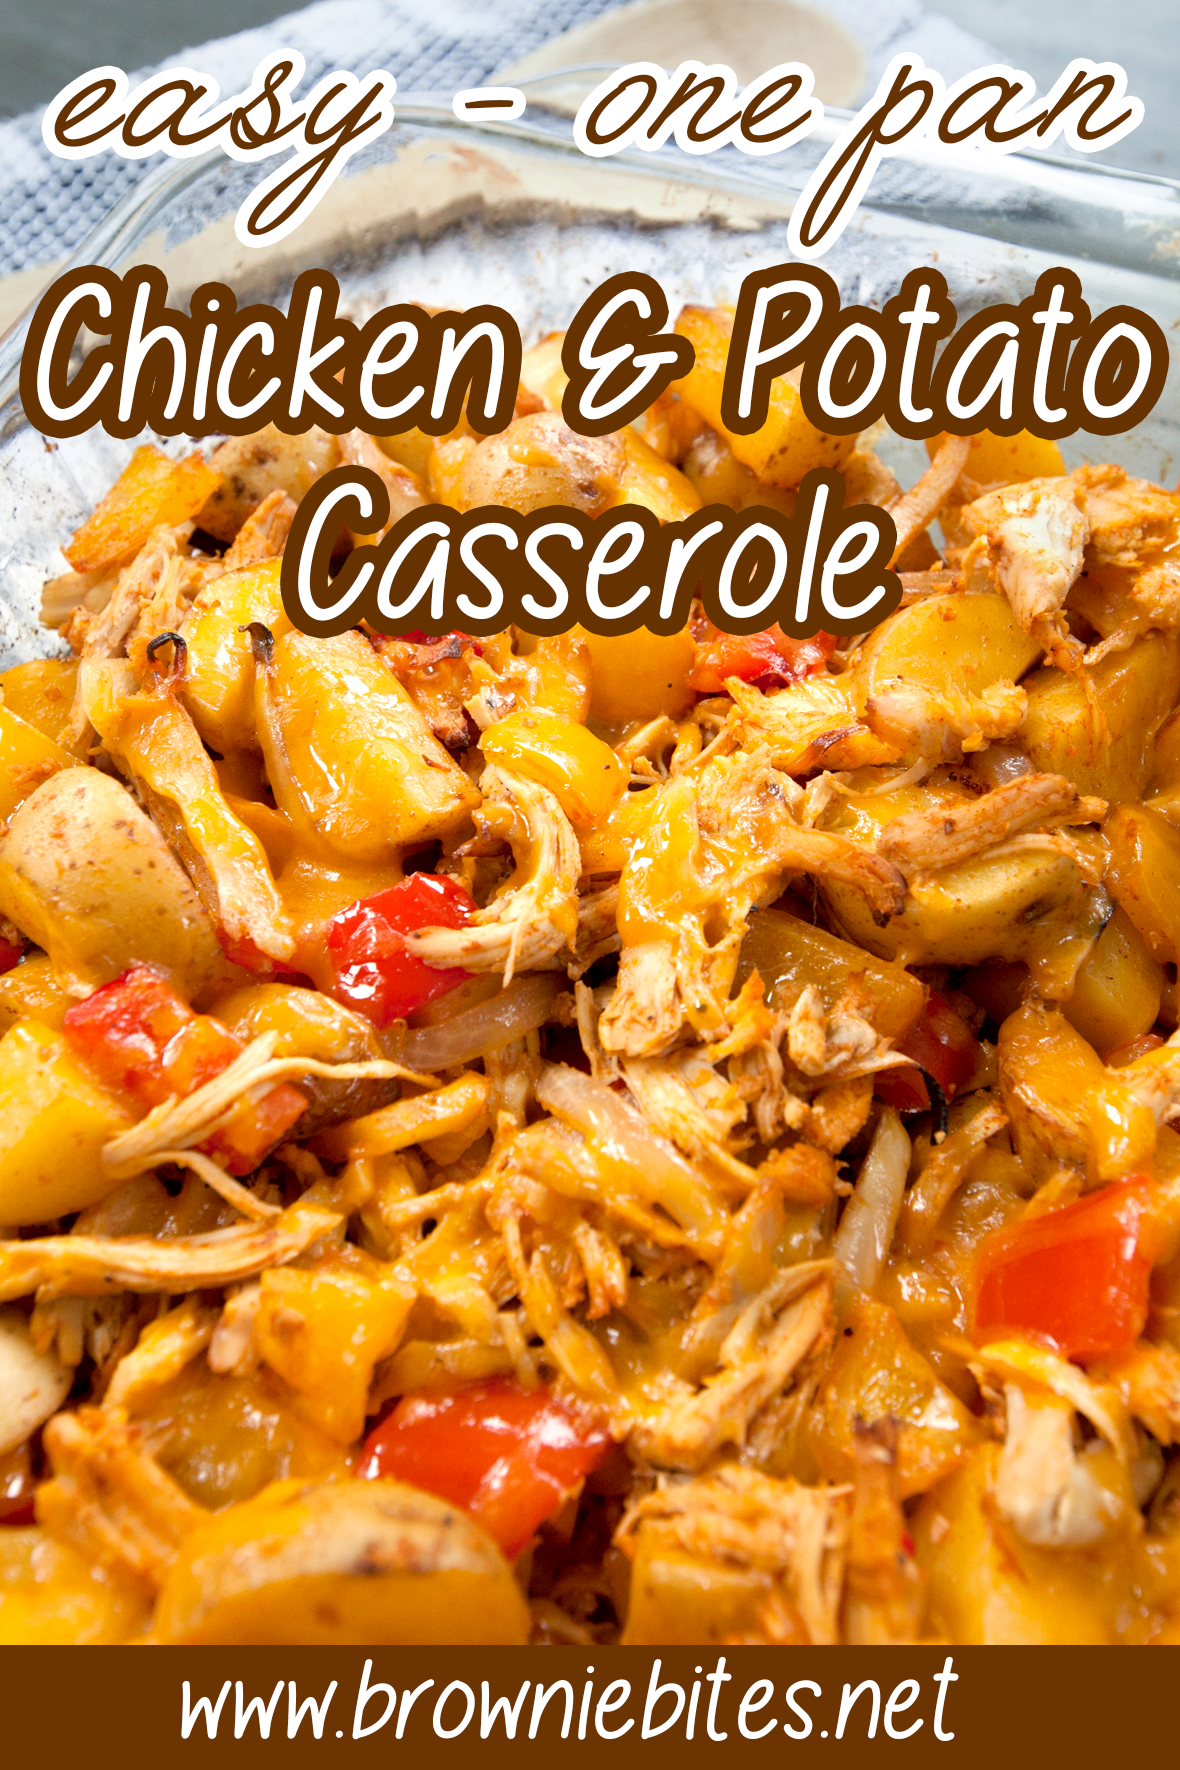 image of a chicken and potato bake casserole with text for use on pinterest